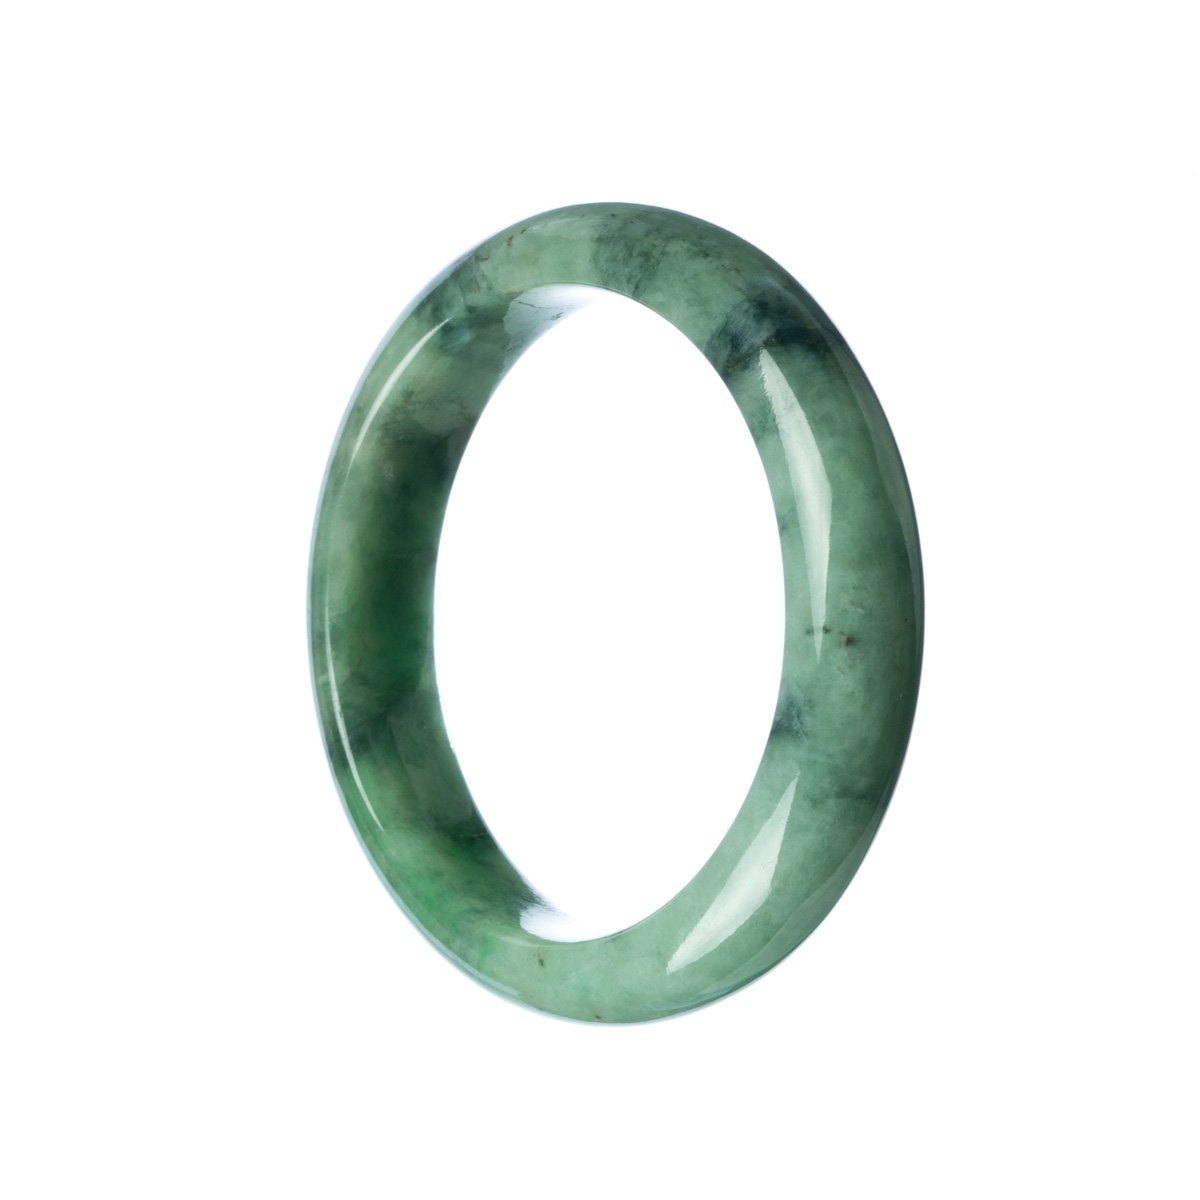 A beautiful green jade bangle bracelet with a semi-round shape, made from high-quality Grade A jade. Perfect for adding a touch of traditional elegance to any outfit.